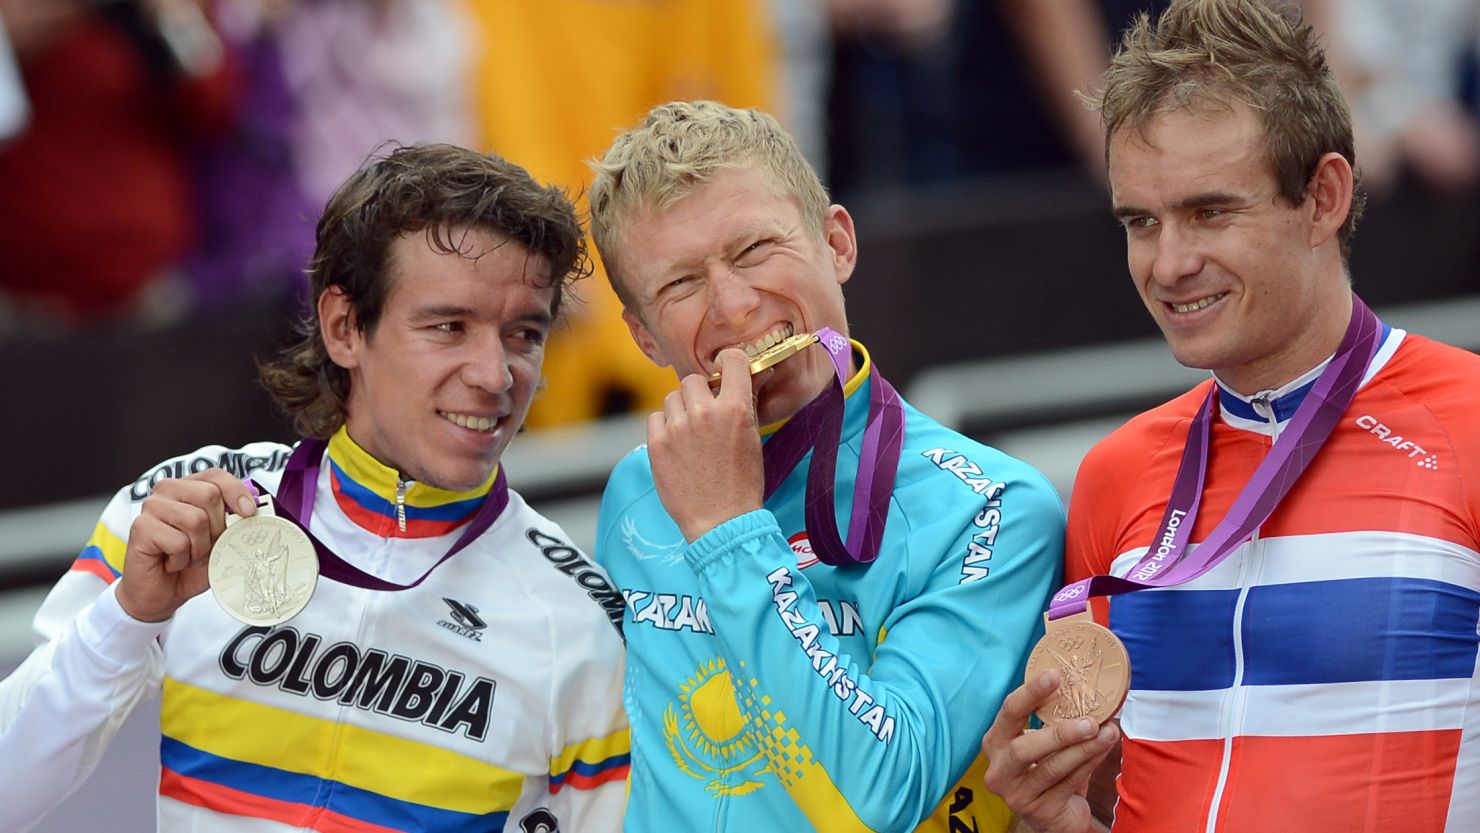  Vinokourov, centre, Uran, left, and Kristoff, right, on the podium after being presented with their medals